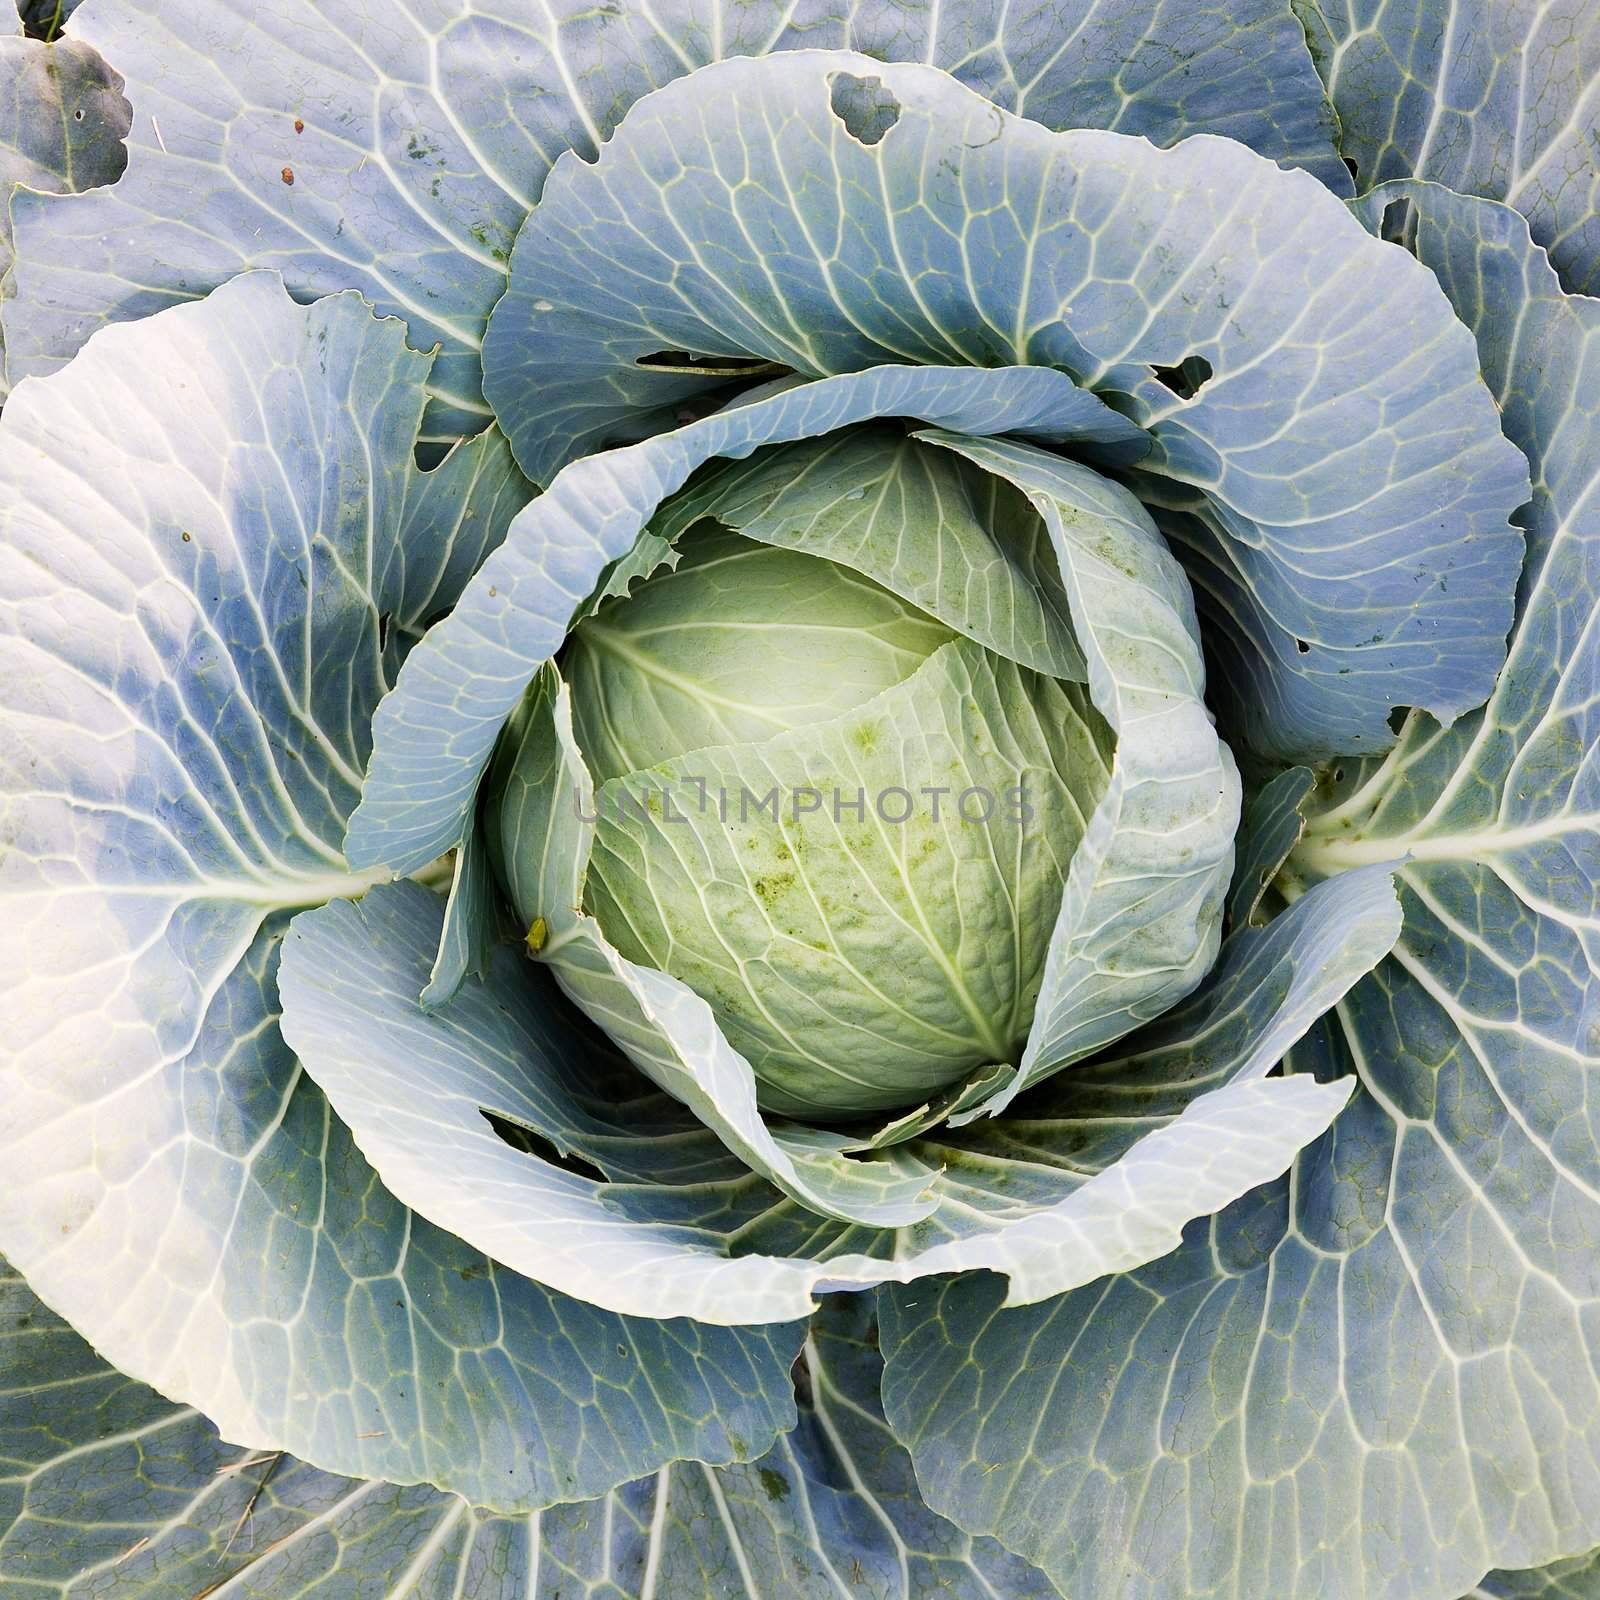 The big bud of cabbage on a bed